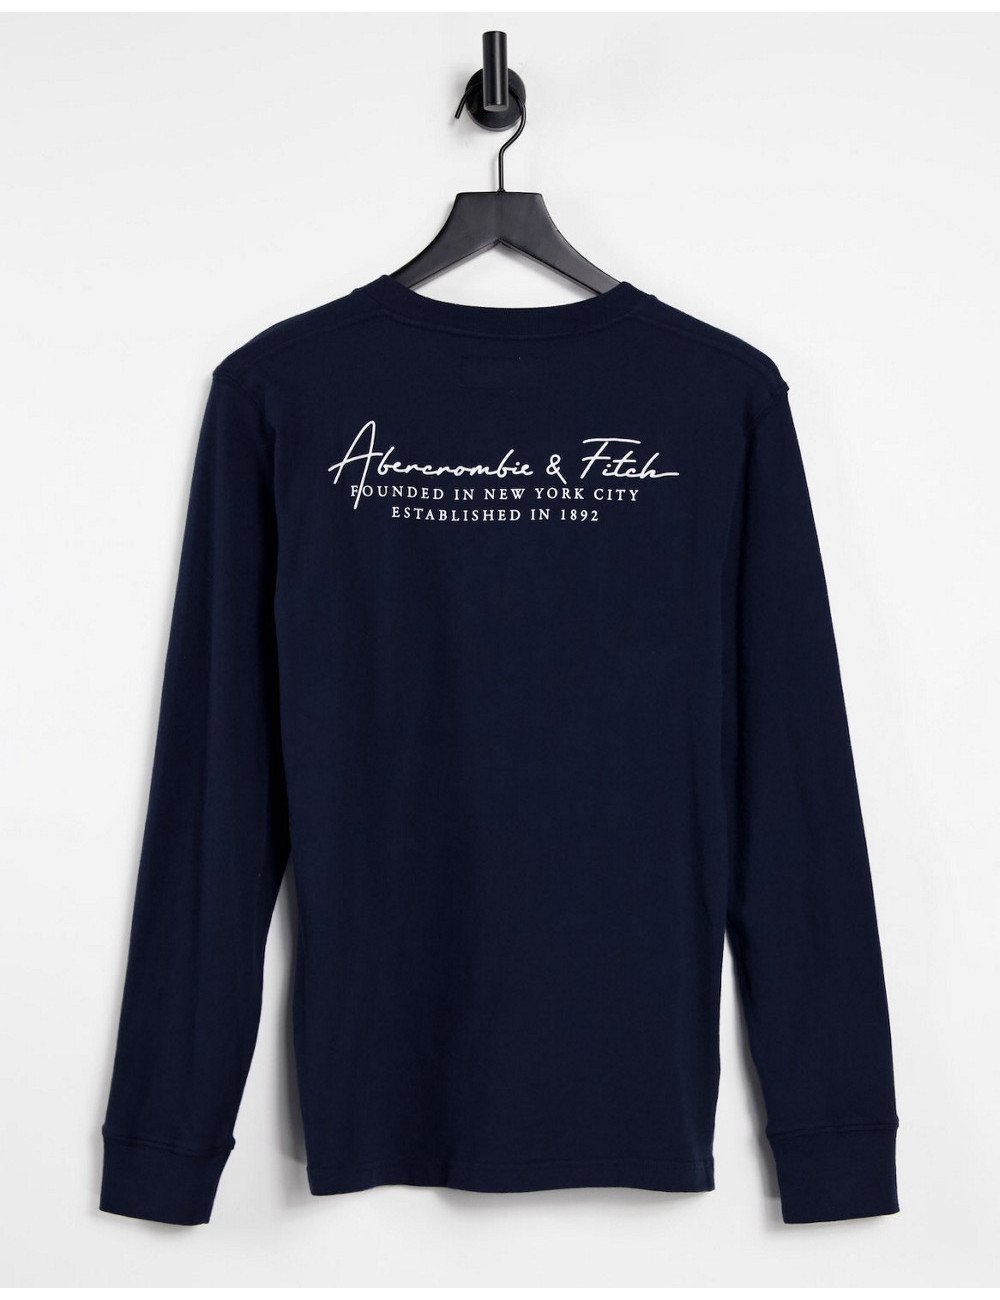 Abercrombie & Fitch sleeve...